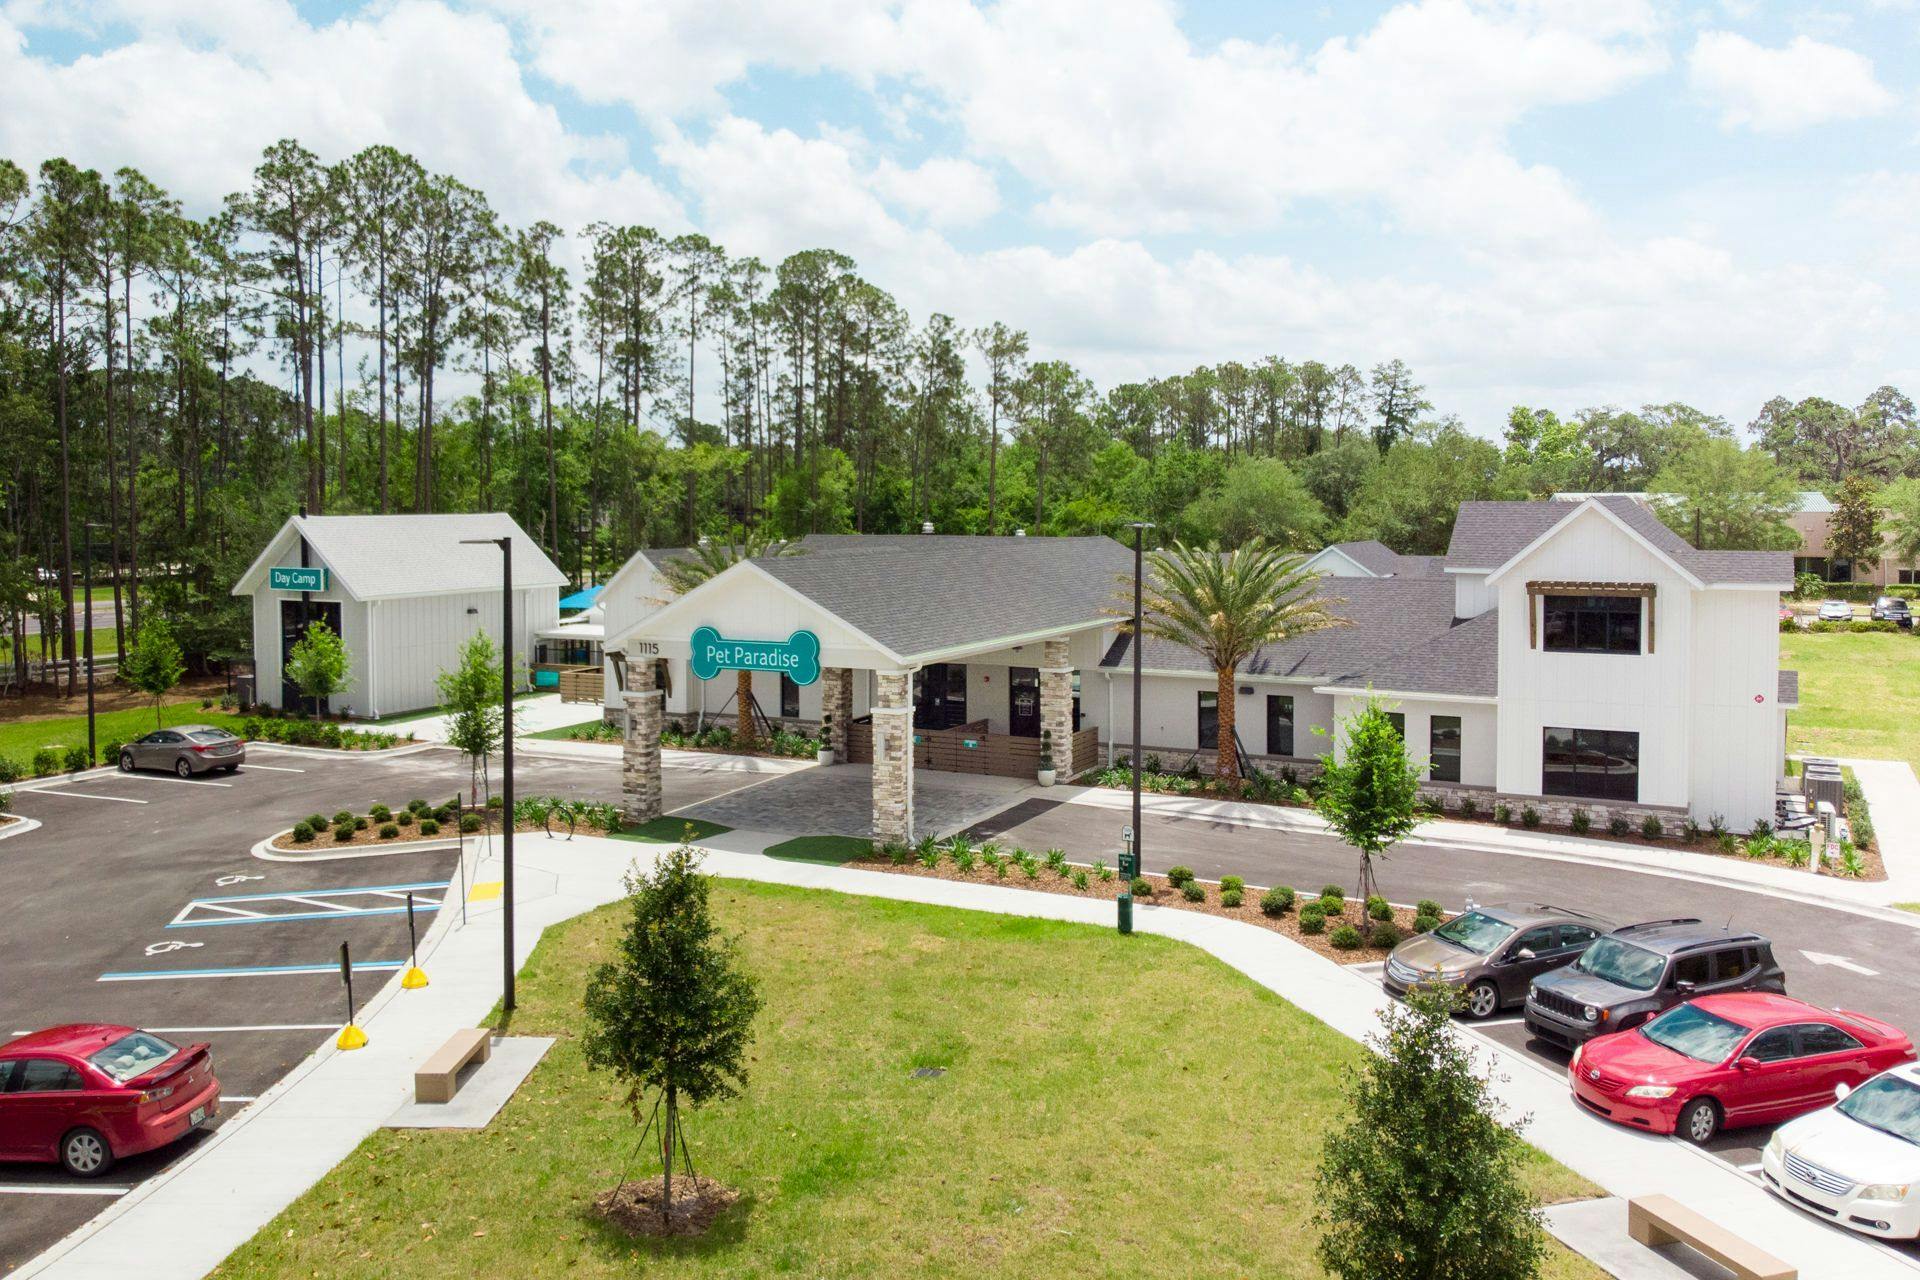 Pet Paradise to debut new location in Yulee, Florida